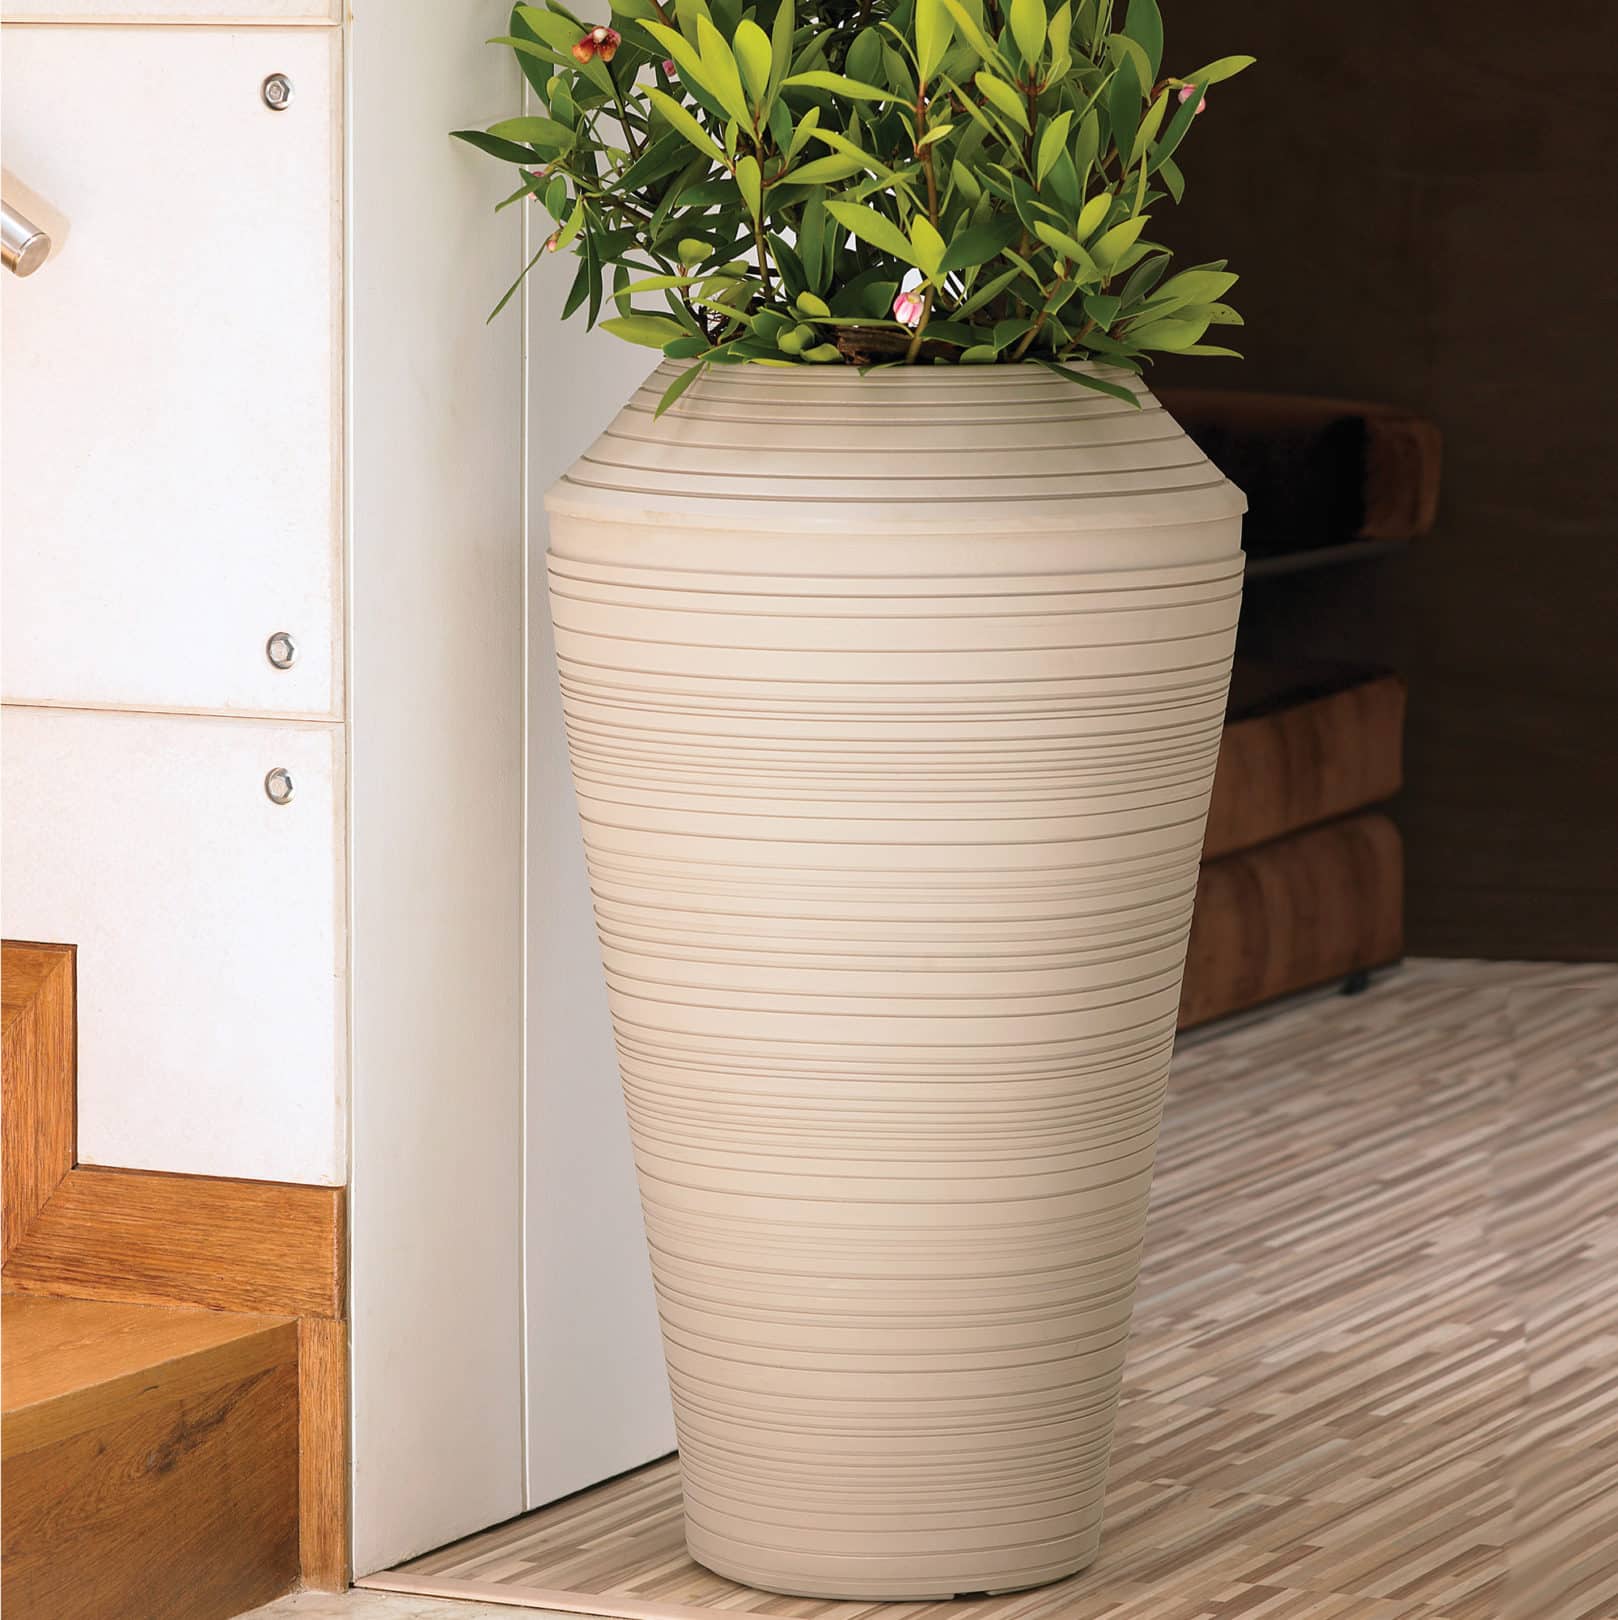 Daniel Tall Planter in Weathered Stone by staircase